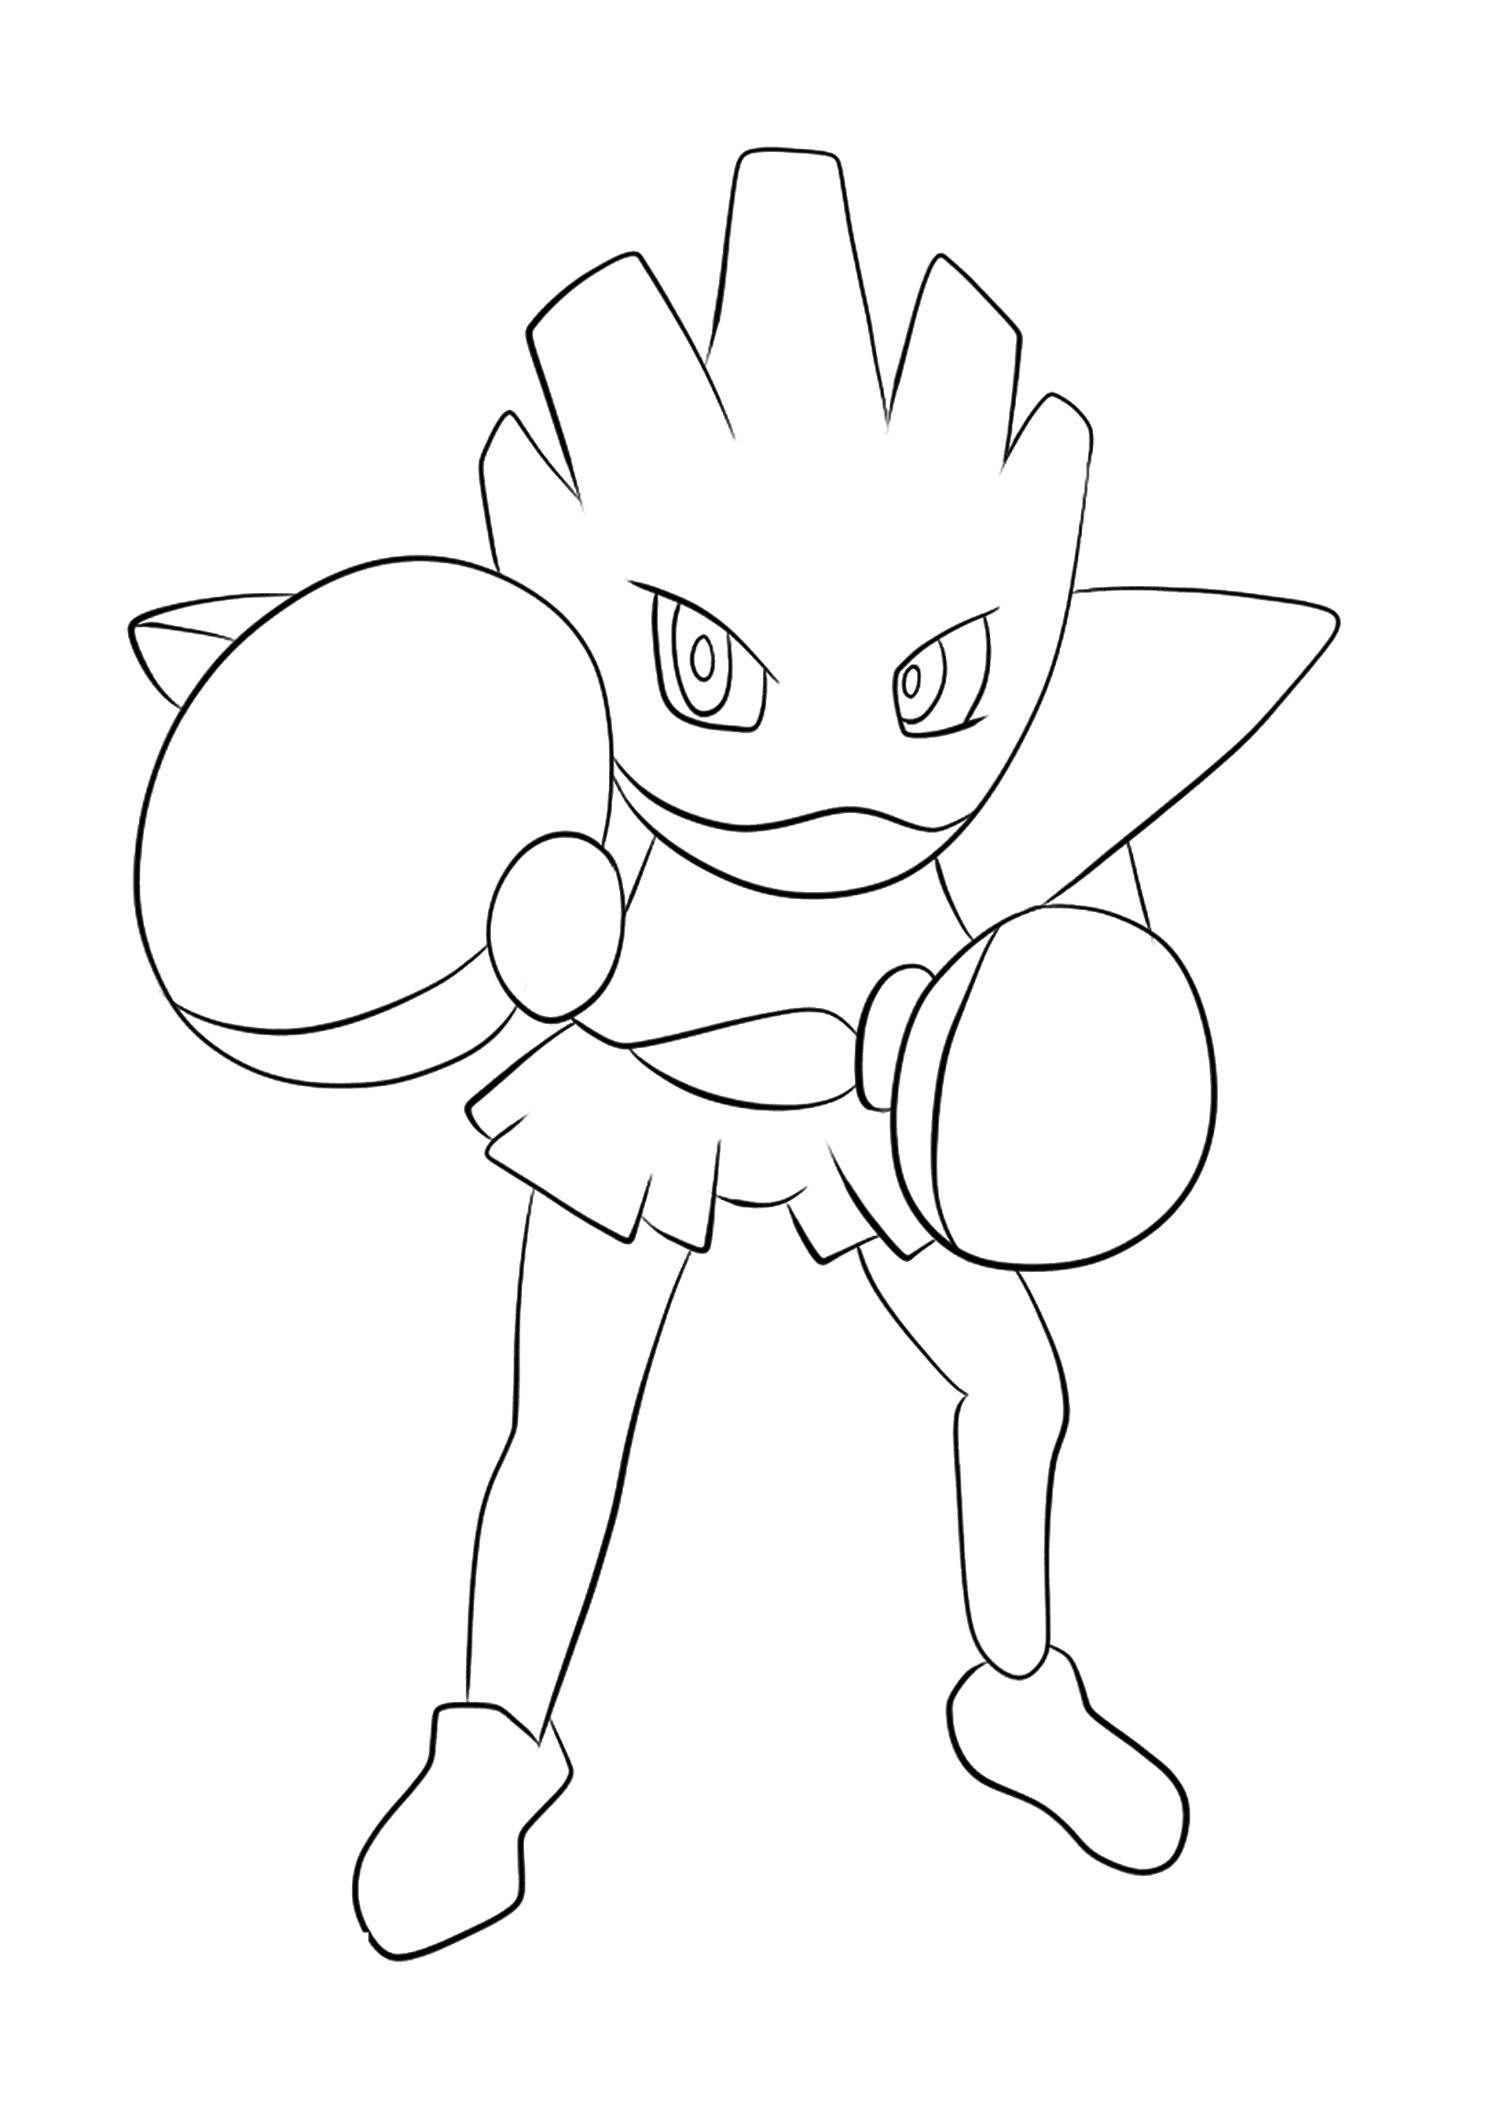 Hitmonchan (No.107). Hitmonchan Coloring page, Generation I Pokemon of type FightingOriginal image credit: Pokemon linearts by Lilly Gerbil on Deviantart.Permission:  All rights reserved © Pokemon company and Ken Sugimori.